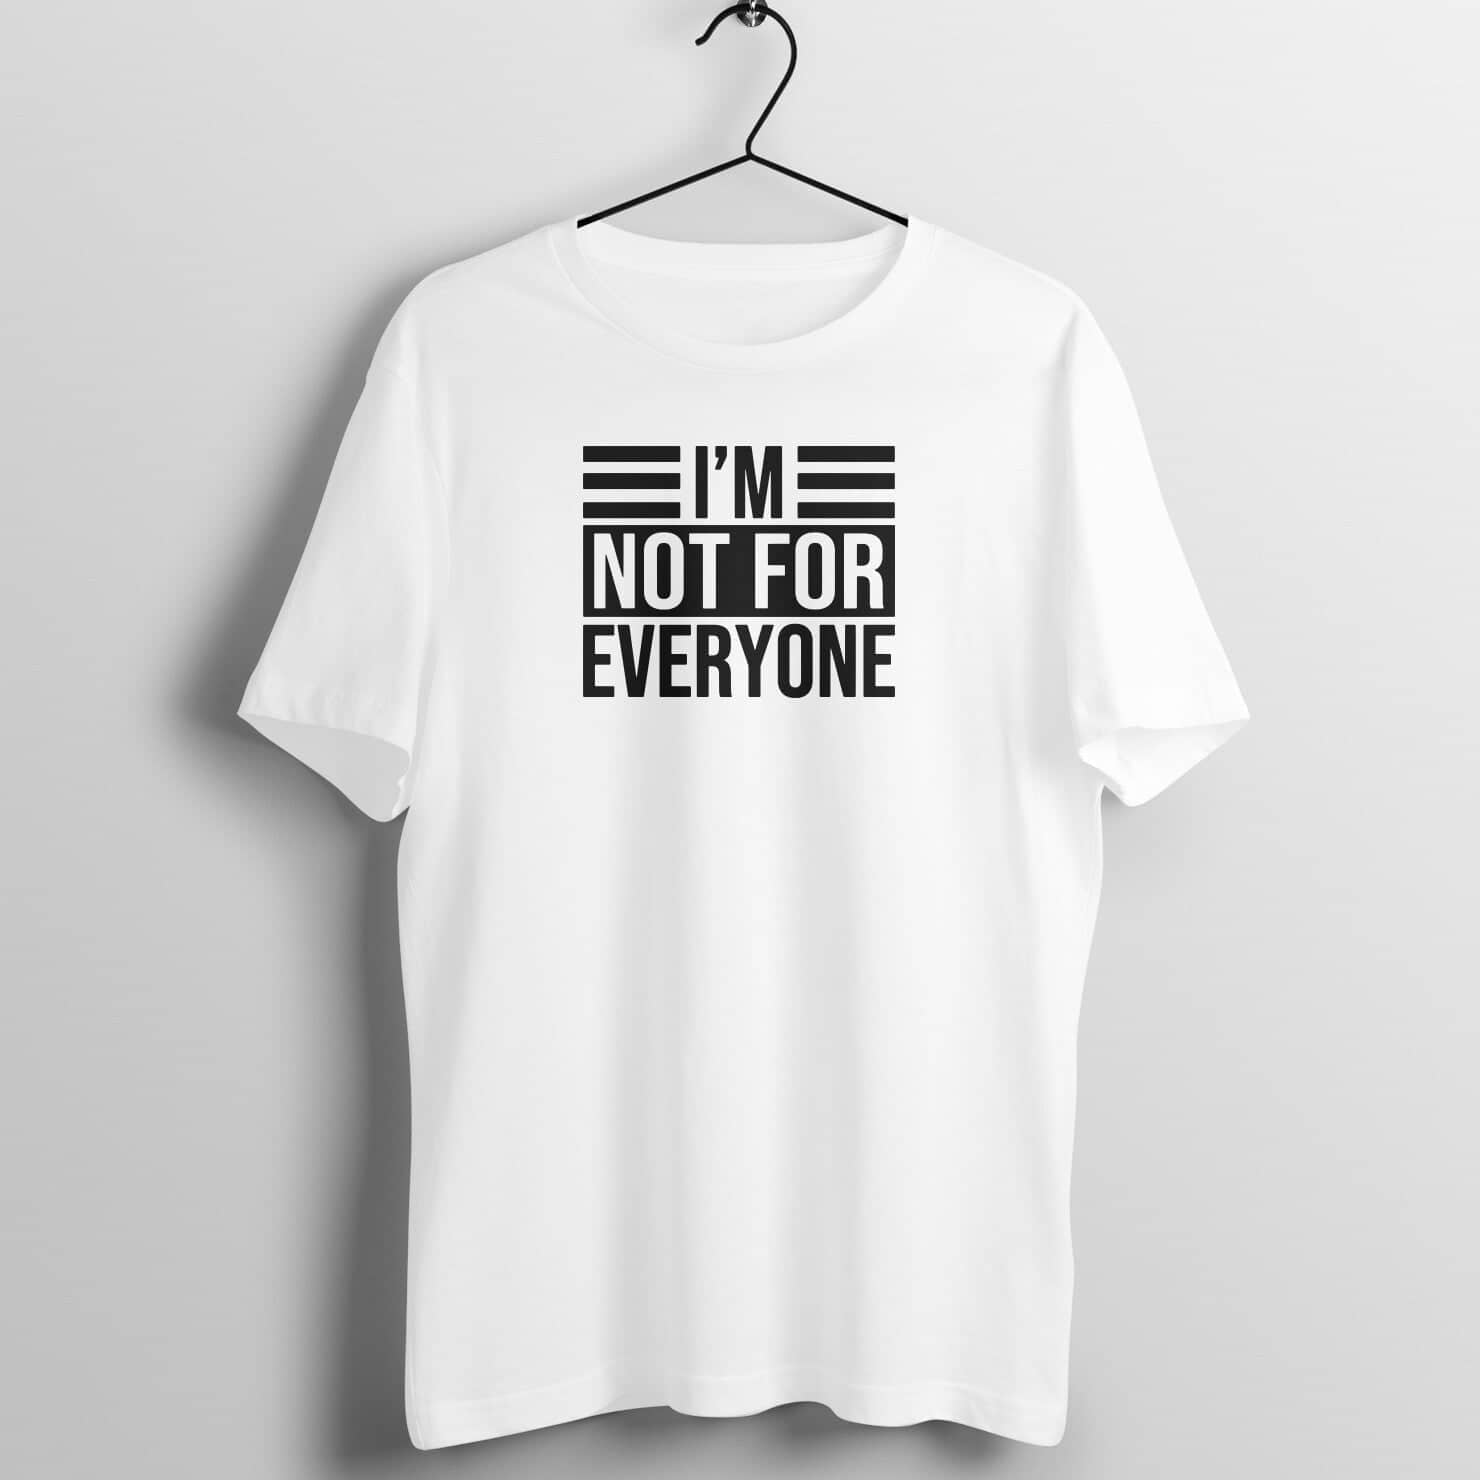 I'm Not for Everyone Special Swag White T Shirt for Men and Women Printrove White S 